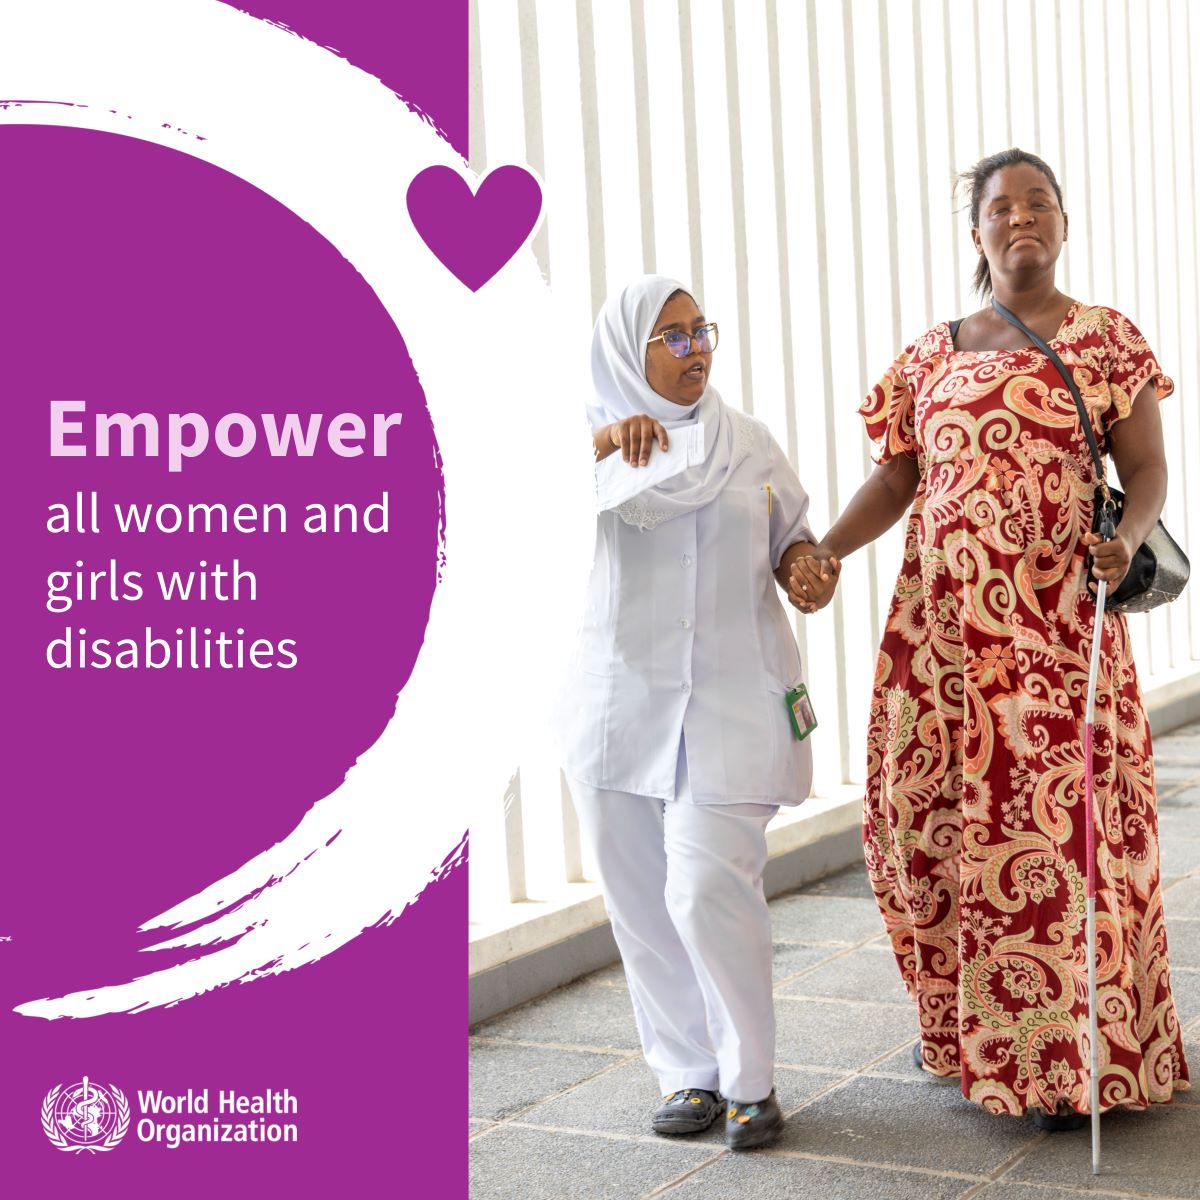 Today is International Women's Day. Investing in women's health means supporting systems that ensure that women and girls with disabilities can: 🏥Access healthcare 💁🏿‍♀️Make informed health decisions 👩🏿‍⚕️Join the healthcare workforce 💪🏿Feel safe and empowered #HealthForAll #IWD2024